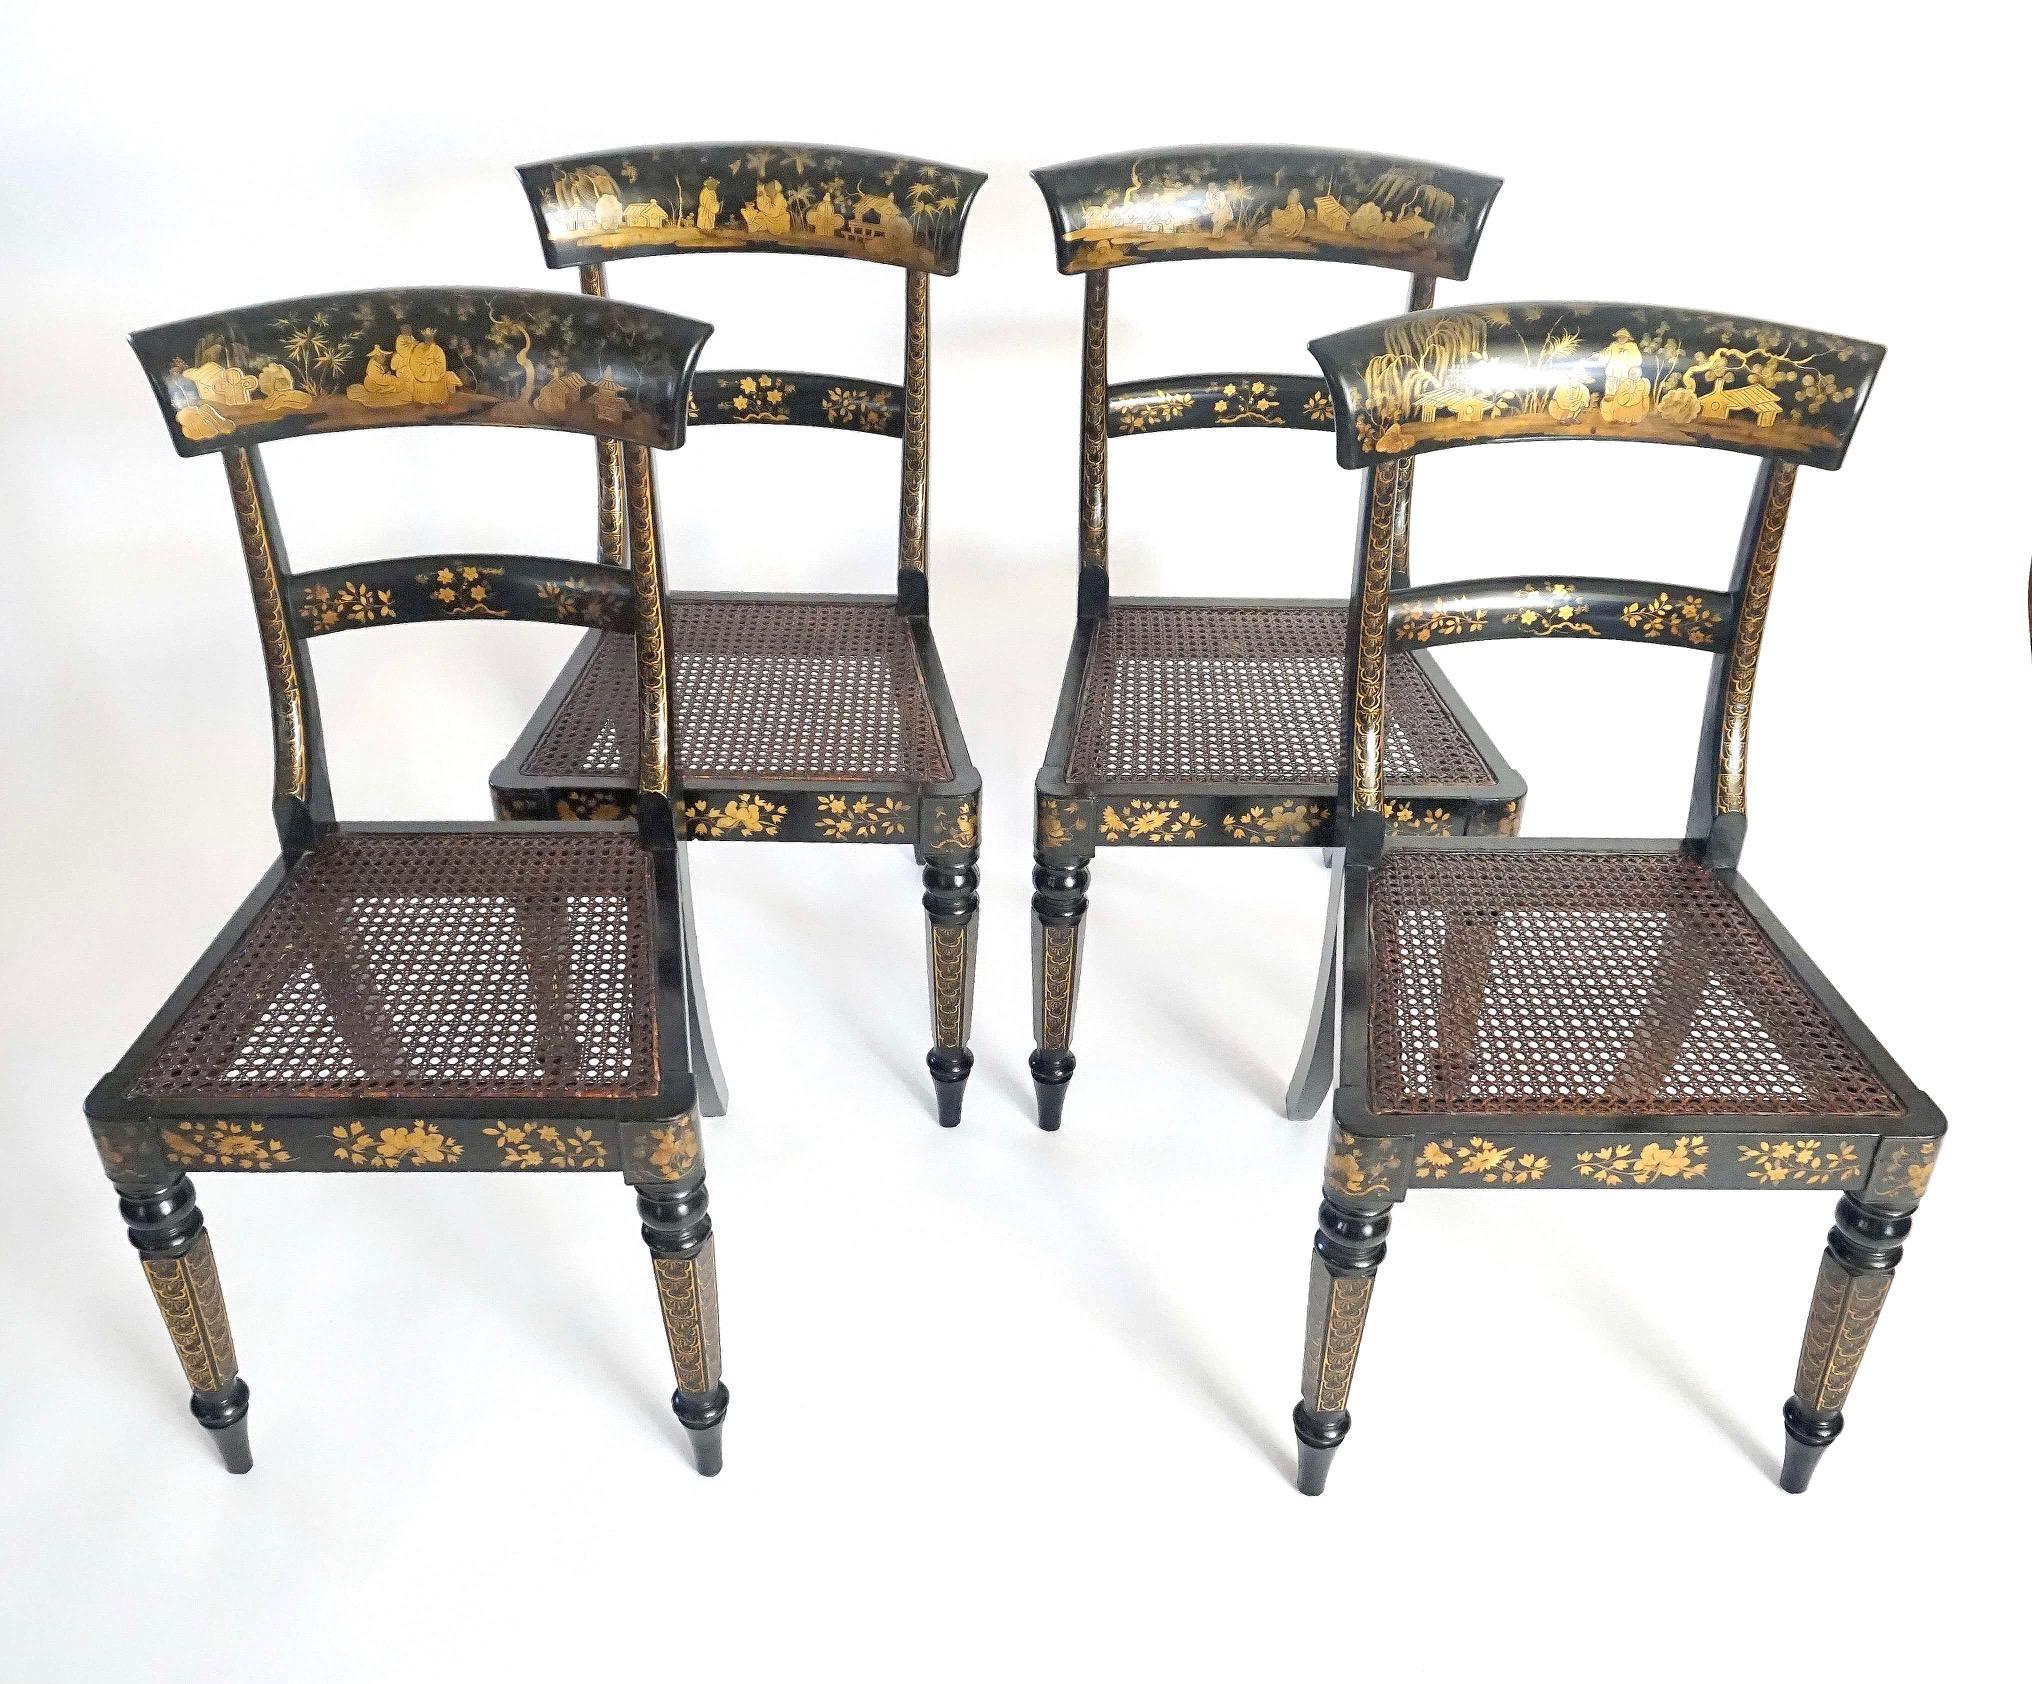 Hand-Woven English Chinoiserie Chairs, Ex-Garvan Collection Yale University, circa 1835 For Sale